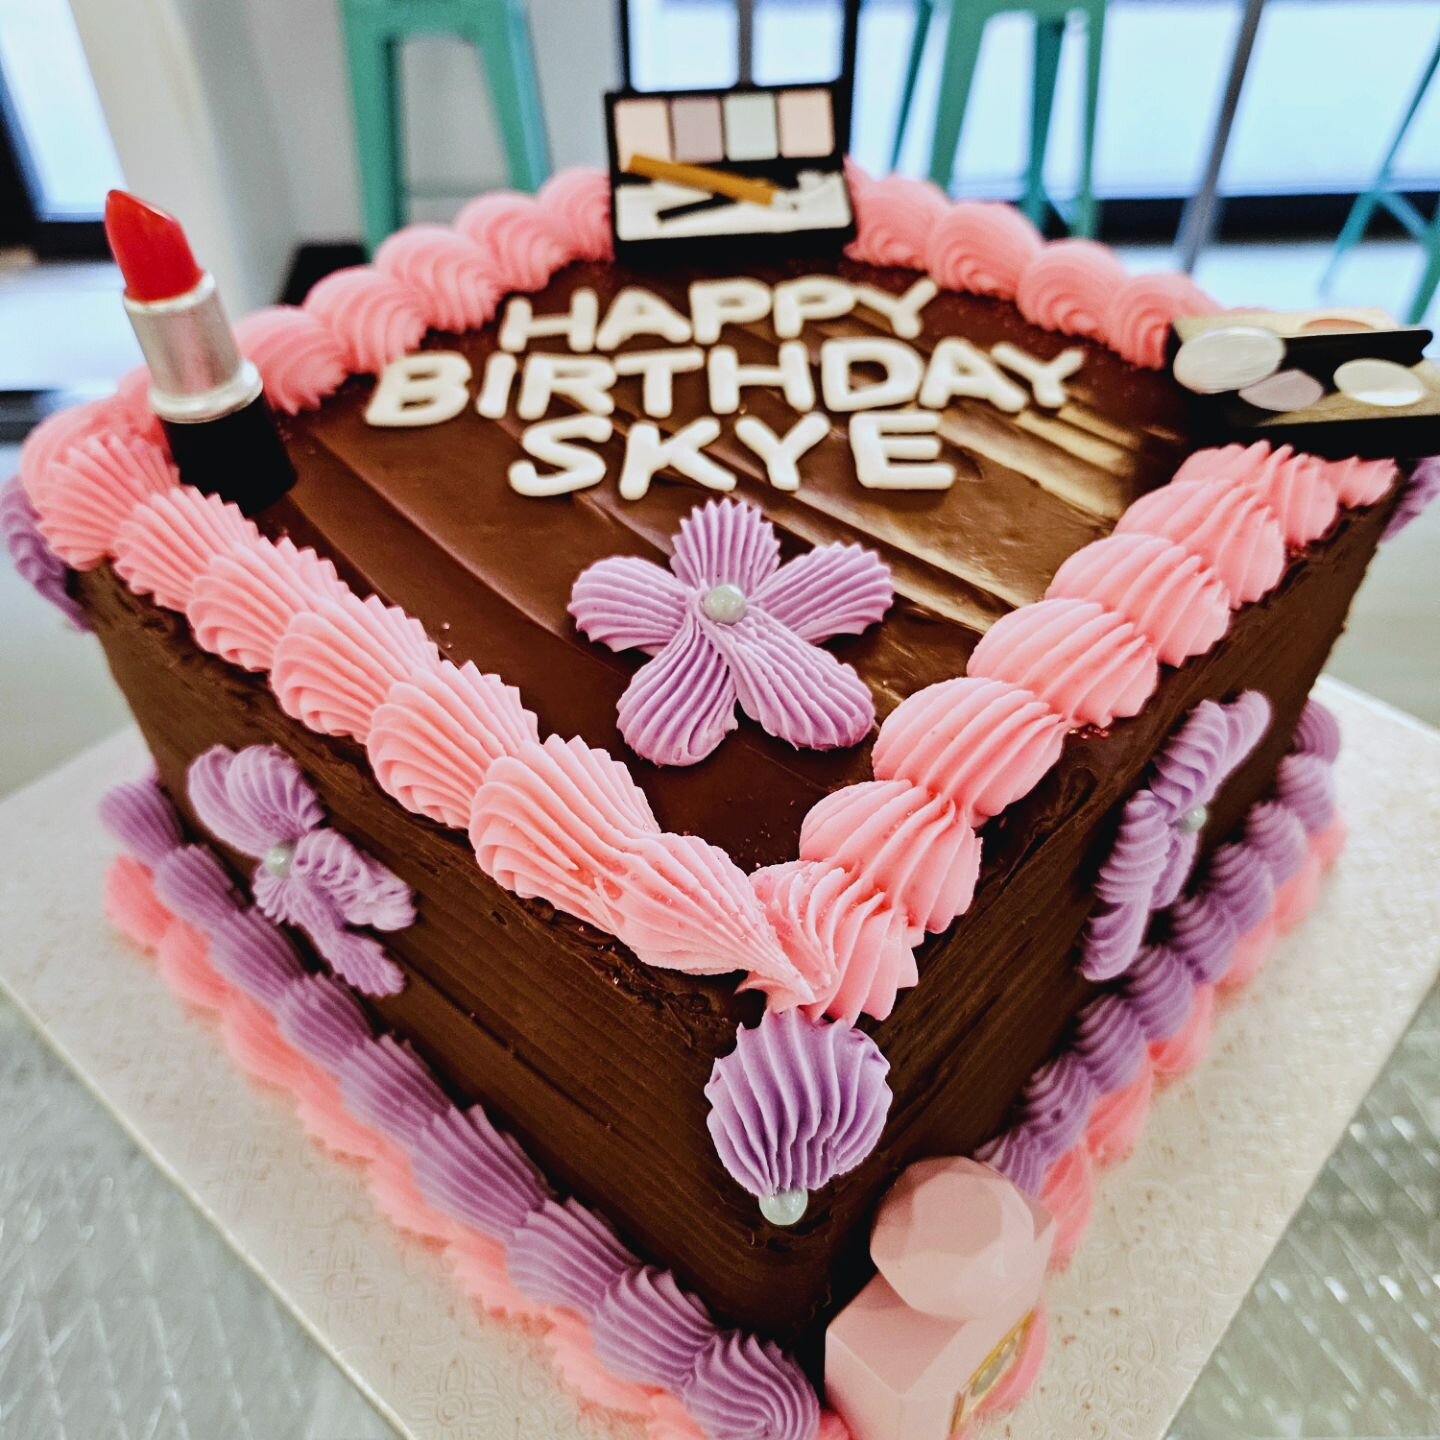 Had so much fun making this 10th birthday cake for Skye!